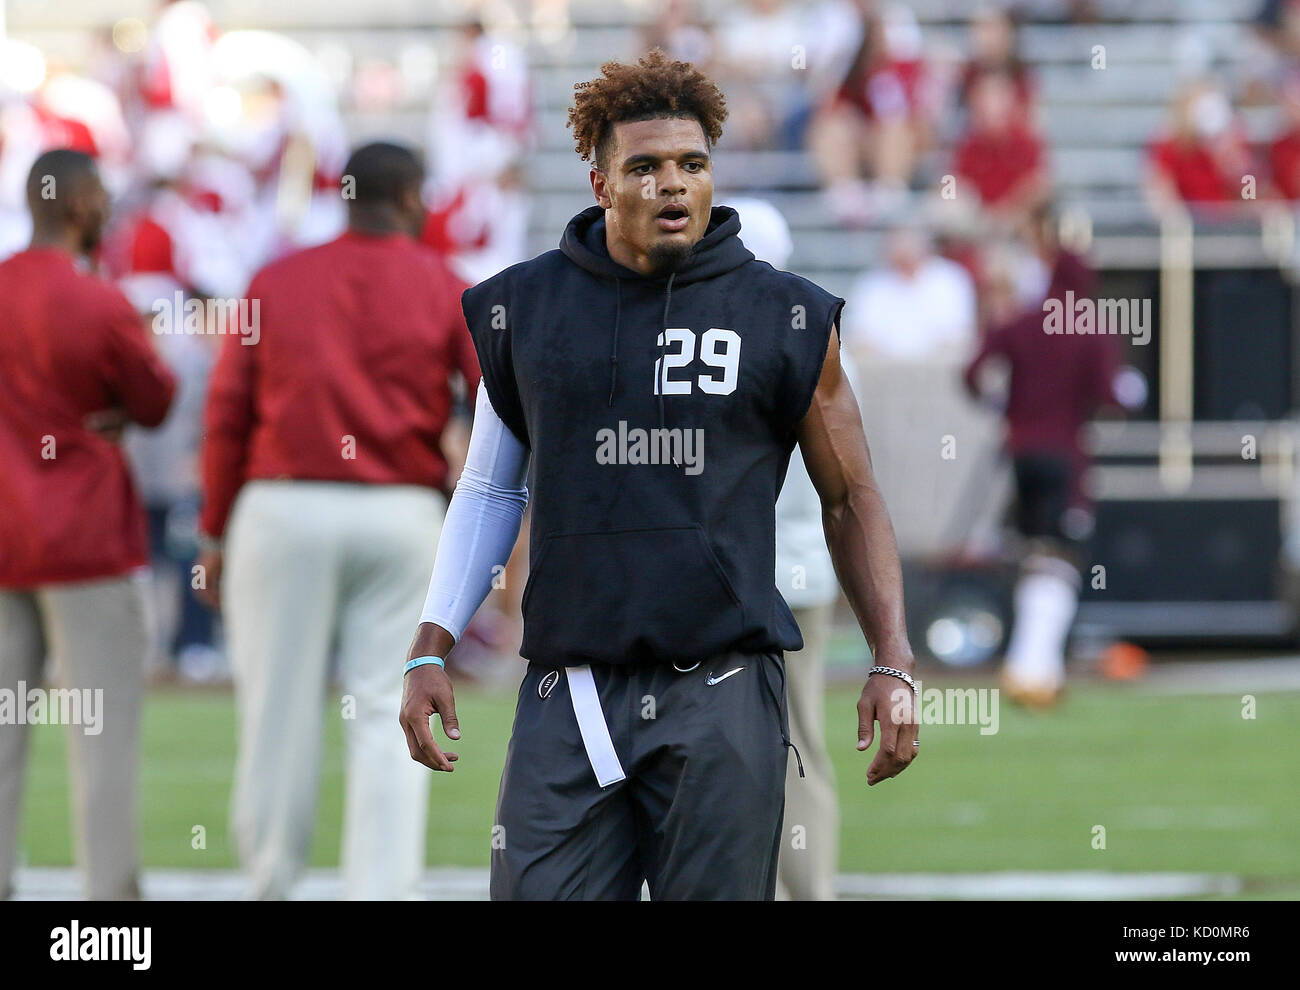 October 6, 2017: Alabama Crimson Tide defensive back Minkah Fitzpatrick (29) during the NCAA football game between the Alabama Crimson Tide and the Texas A&M Aggies at Kyle Field in College Station, TX; John Glaser/CSM. Stock Photo